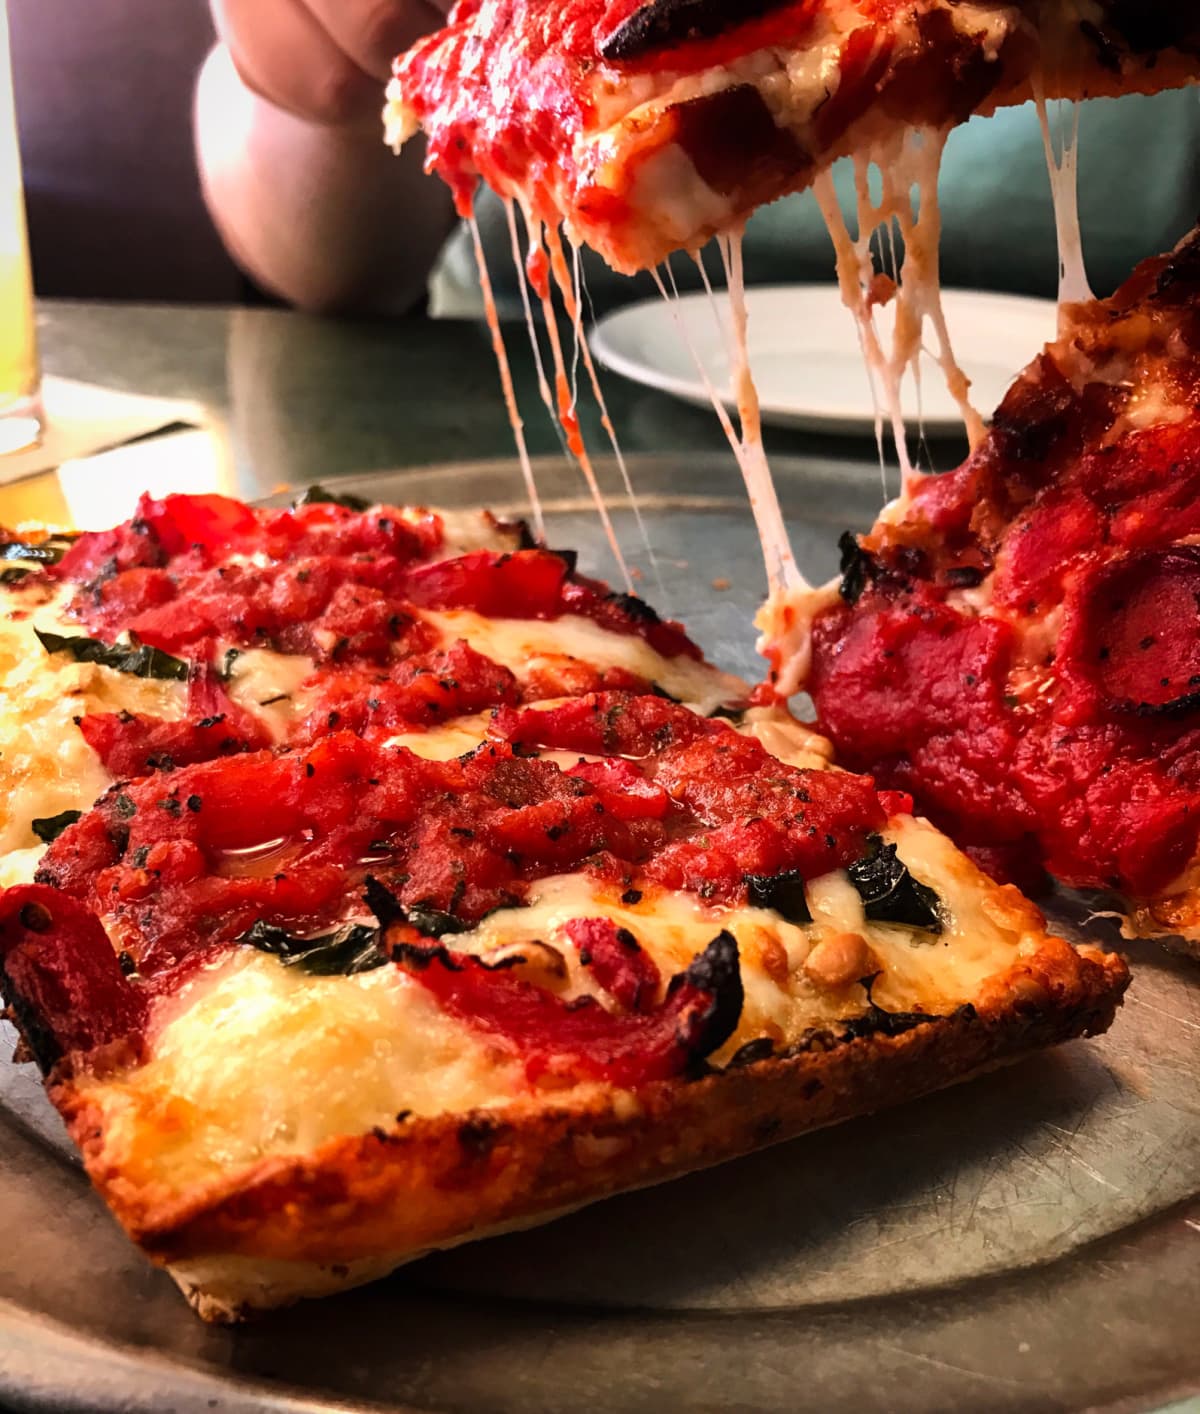 Detroit style deep dish pizza fresh out of the oven being served with gooey cheese and the caramelized crust edges.